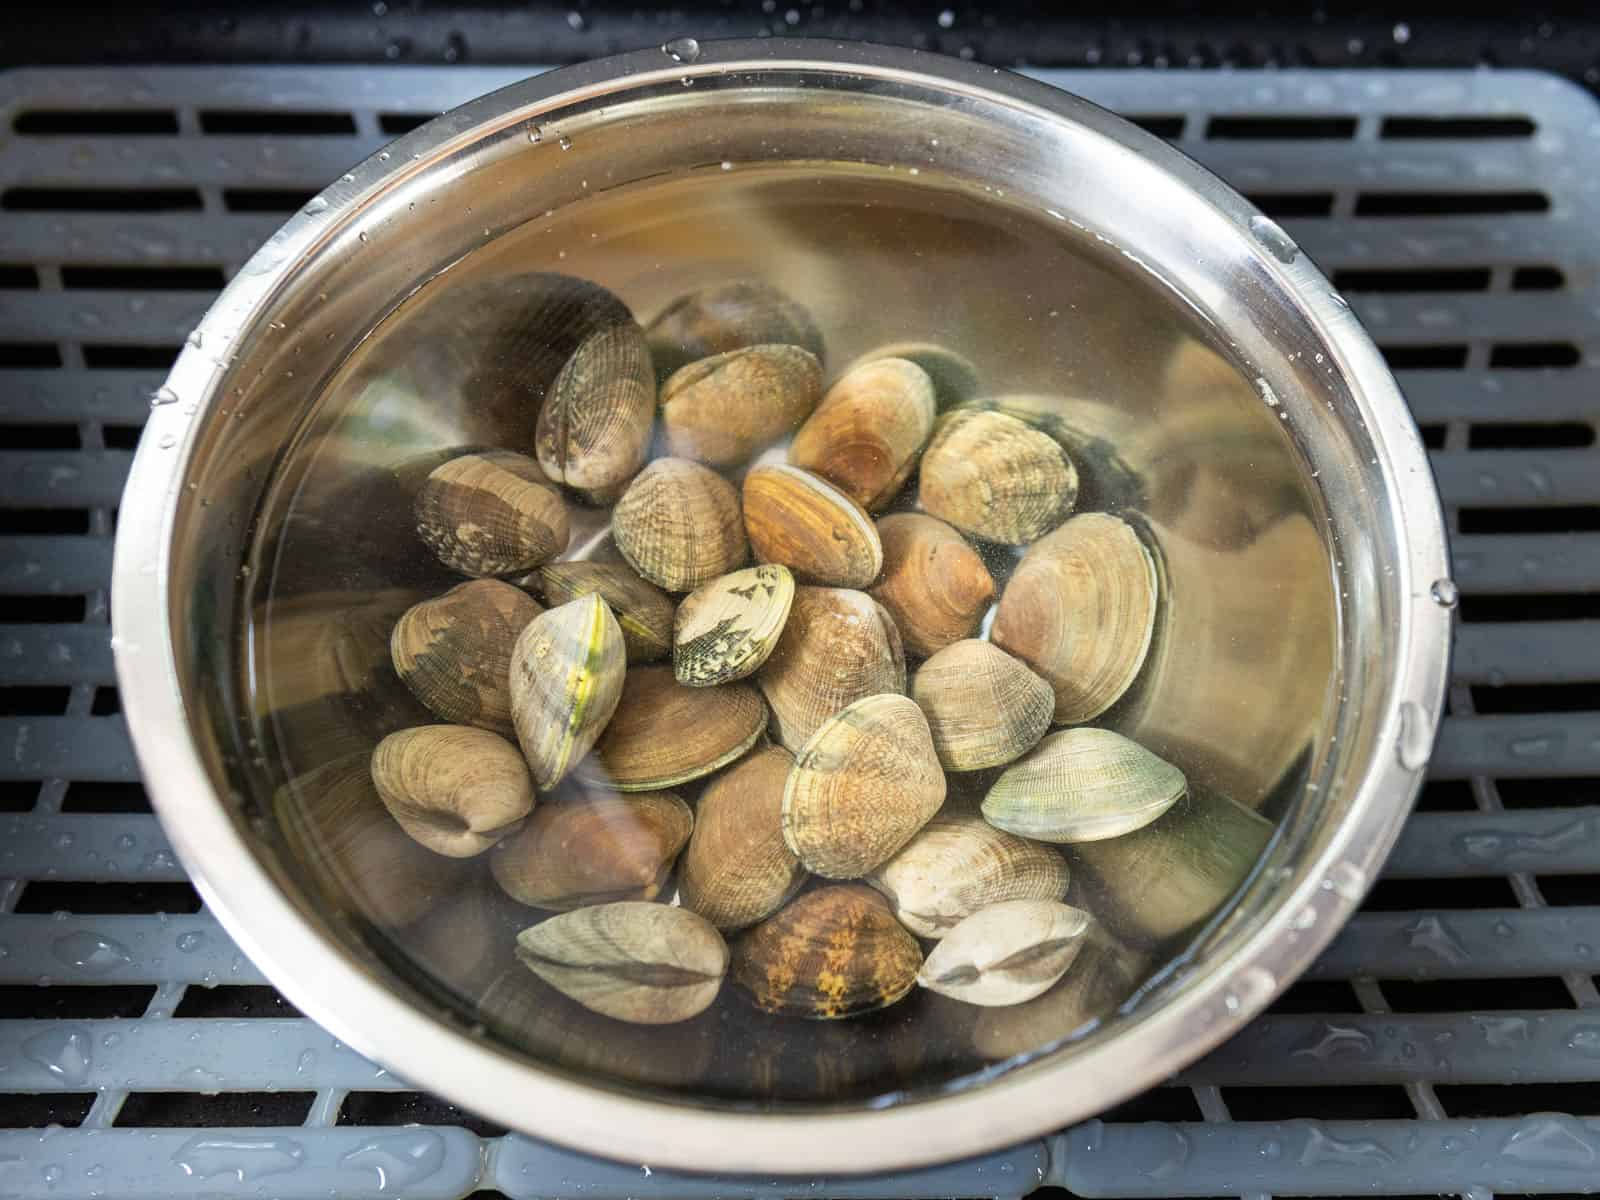 Soak the fresh clams in salted cold water to help purge any sand out.